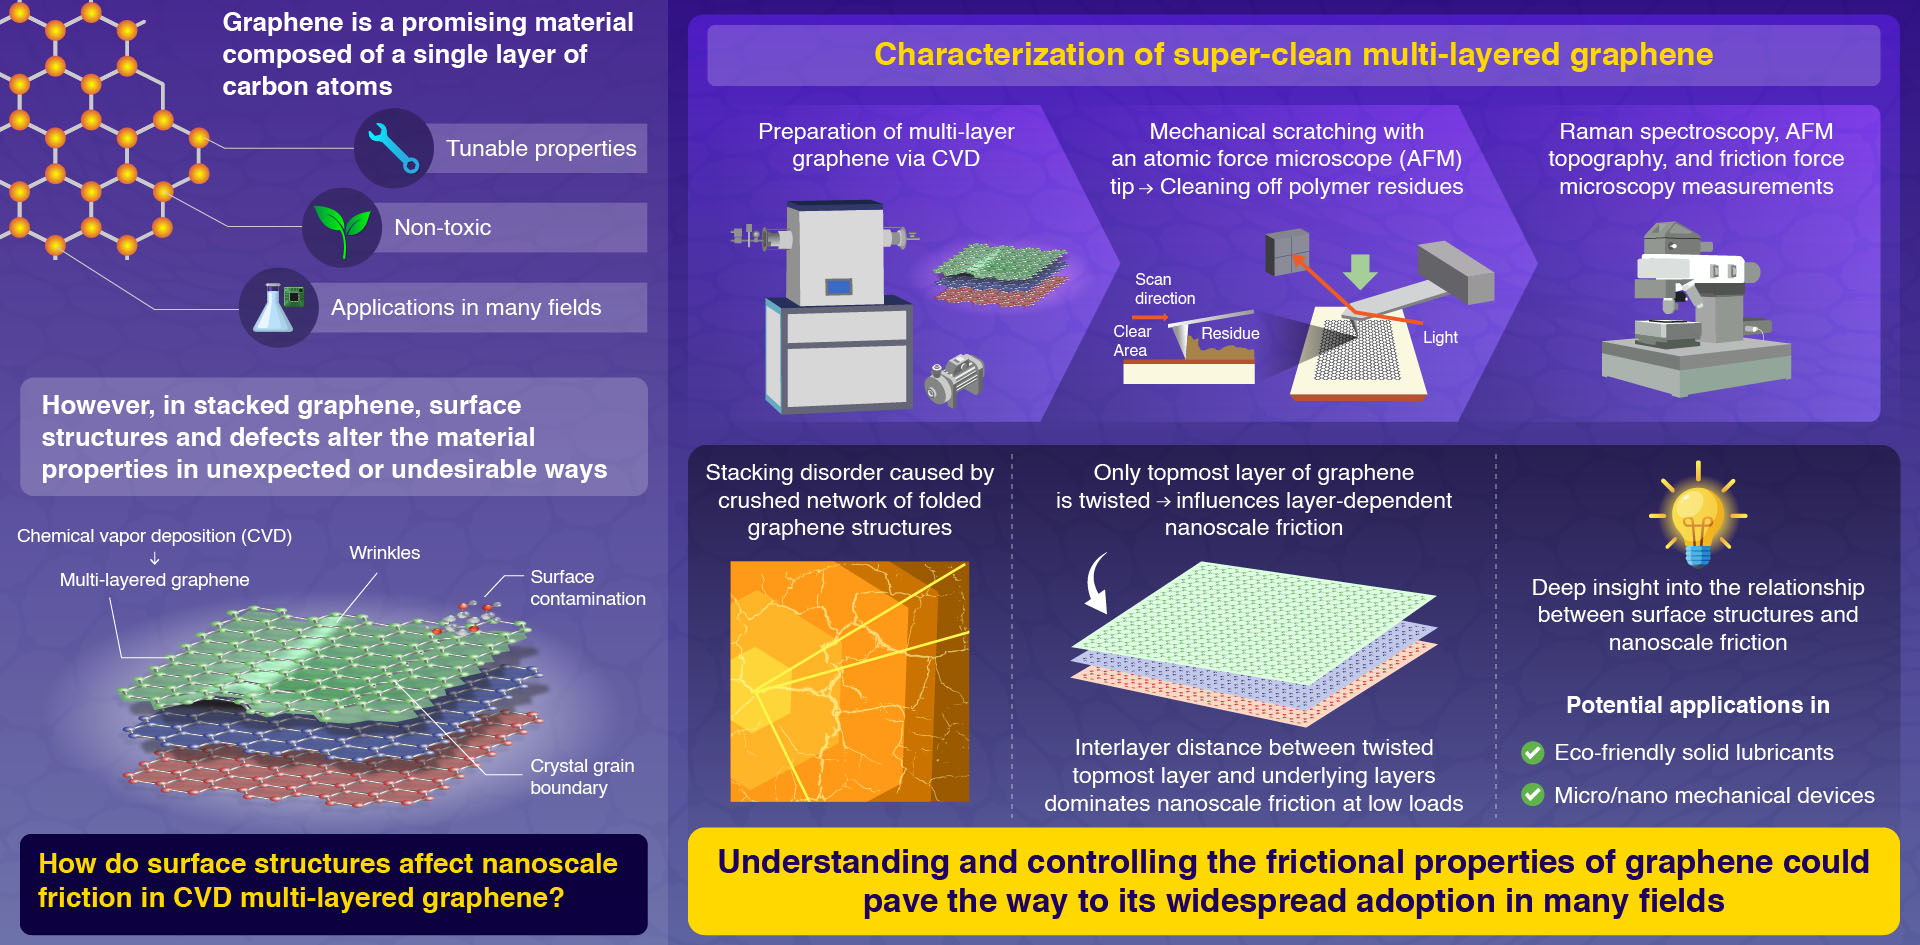 Link between surface structures and nanoscale friction in stacked graphene